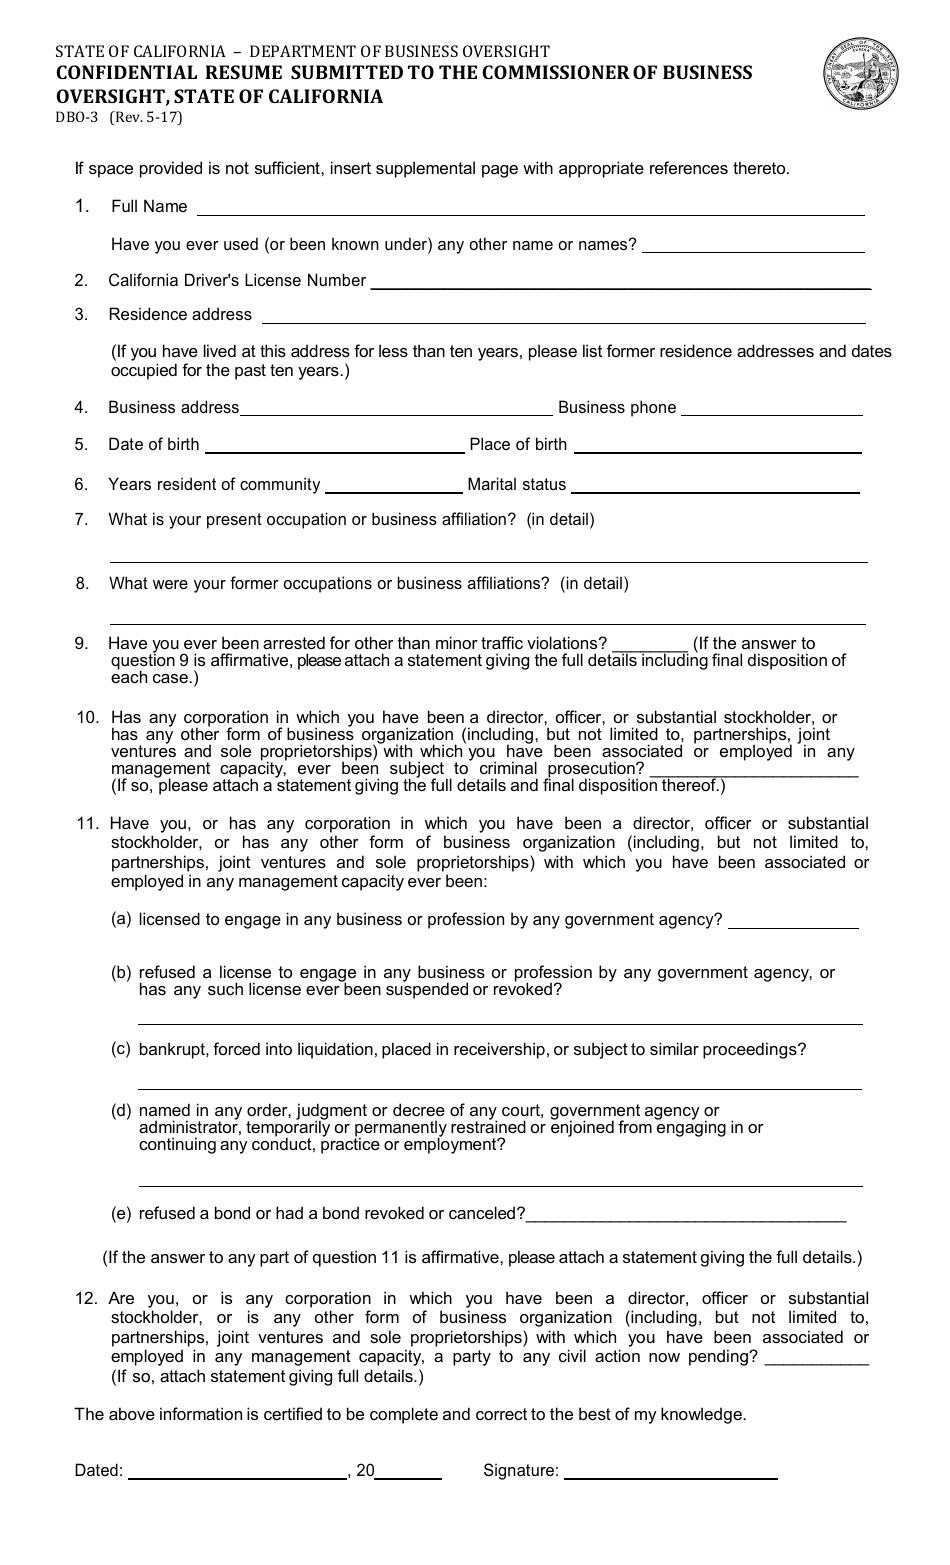 Form DBO-3 Confidential Resume Submitted to the Commissioner of Business Oversight, State of California - California, Page 1